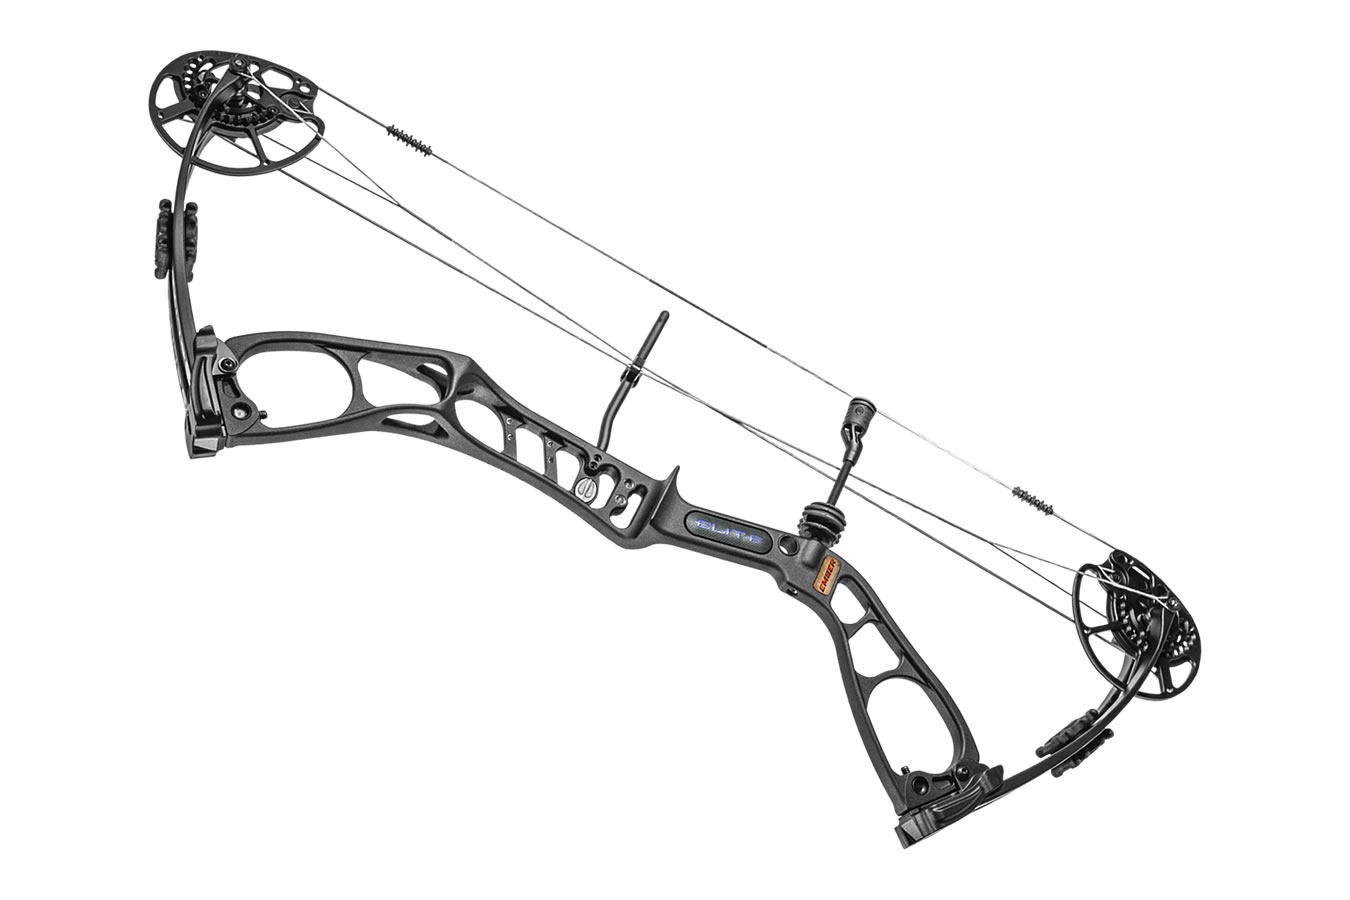 Elite Archery Ember Compound Bow, Adjustable Draw Weight / Length